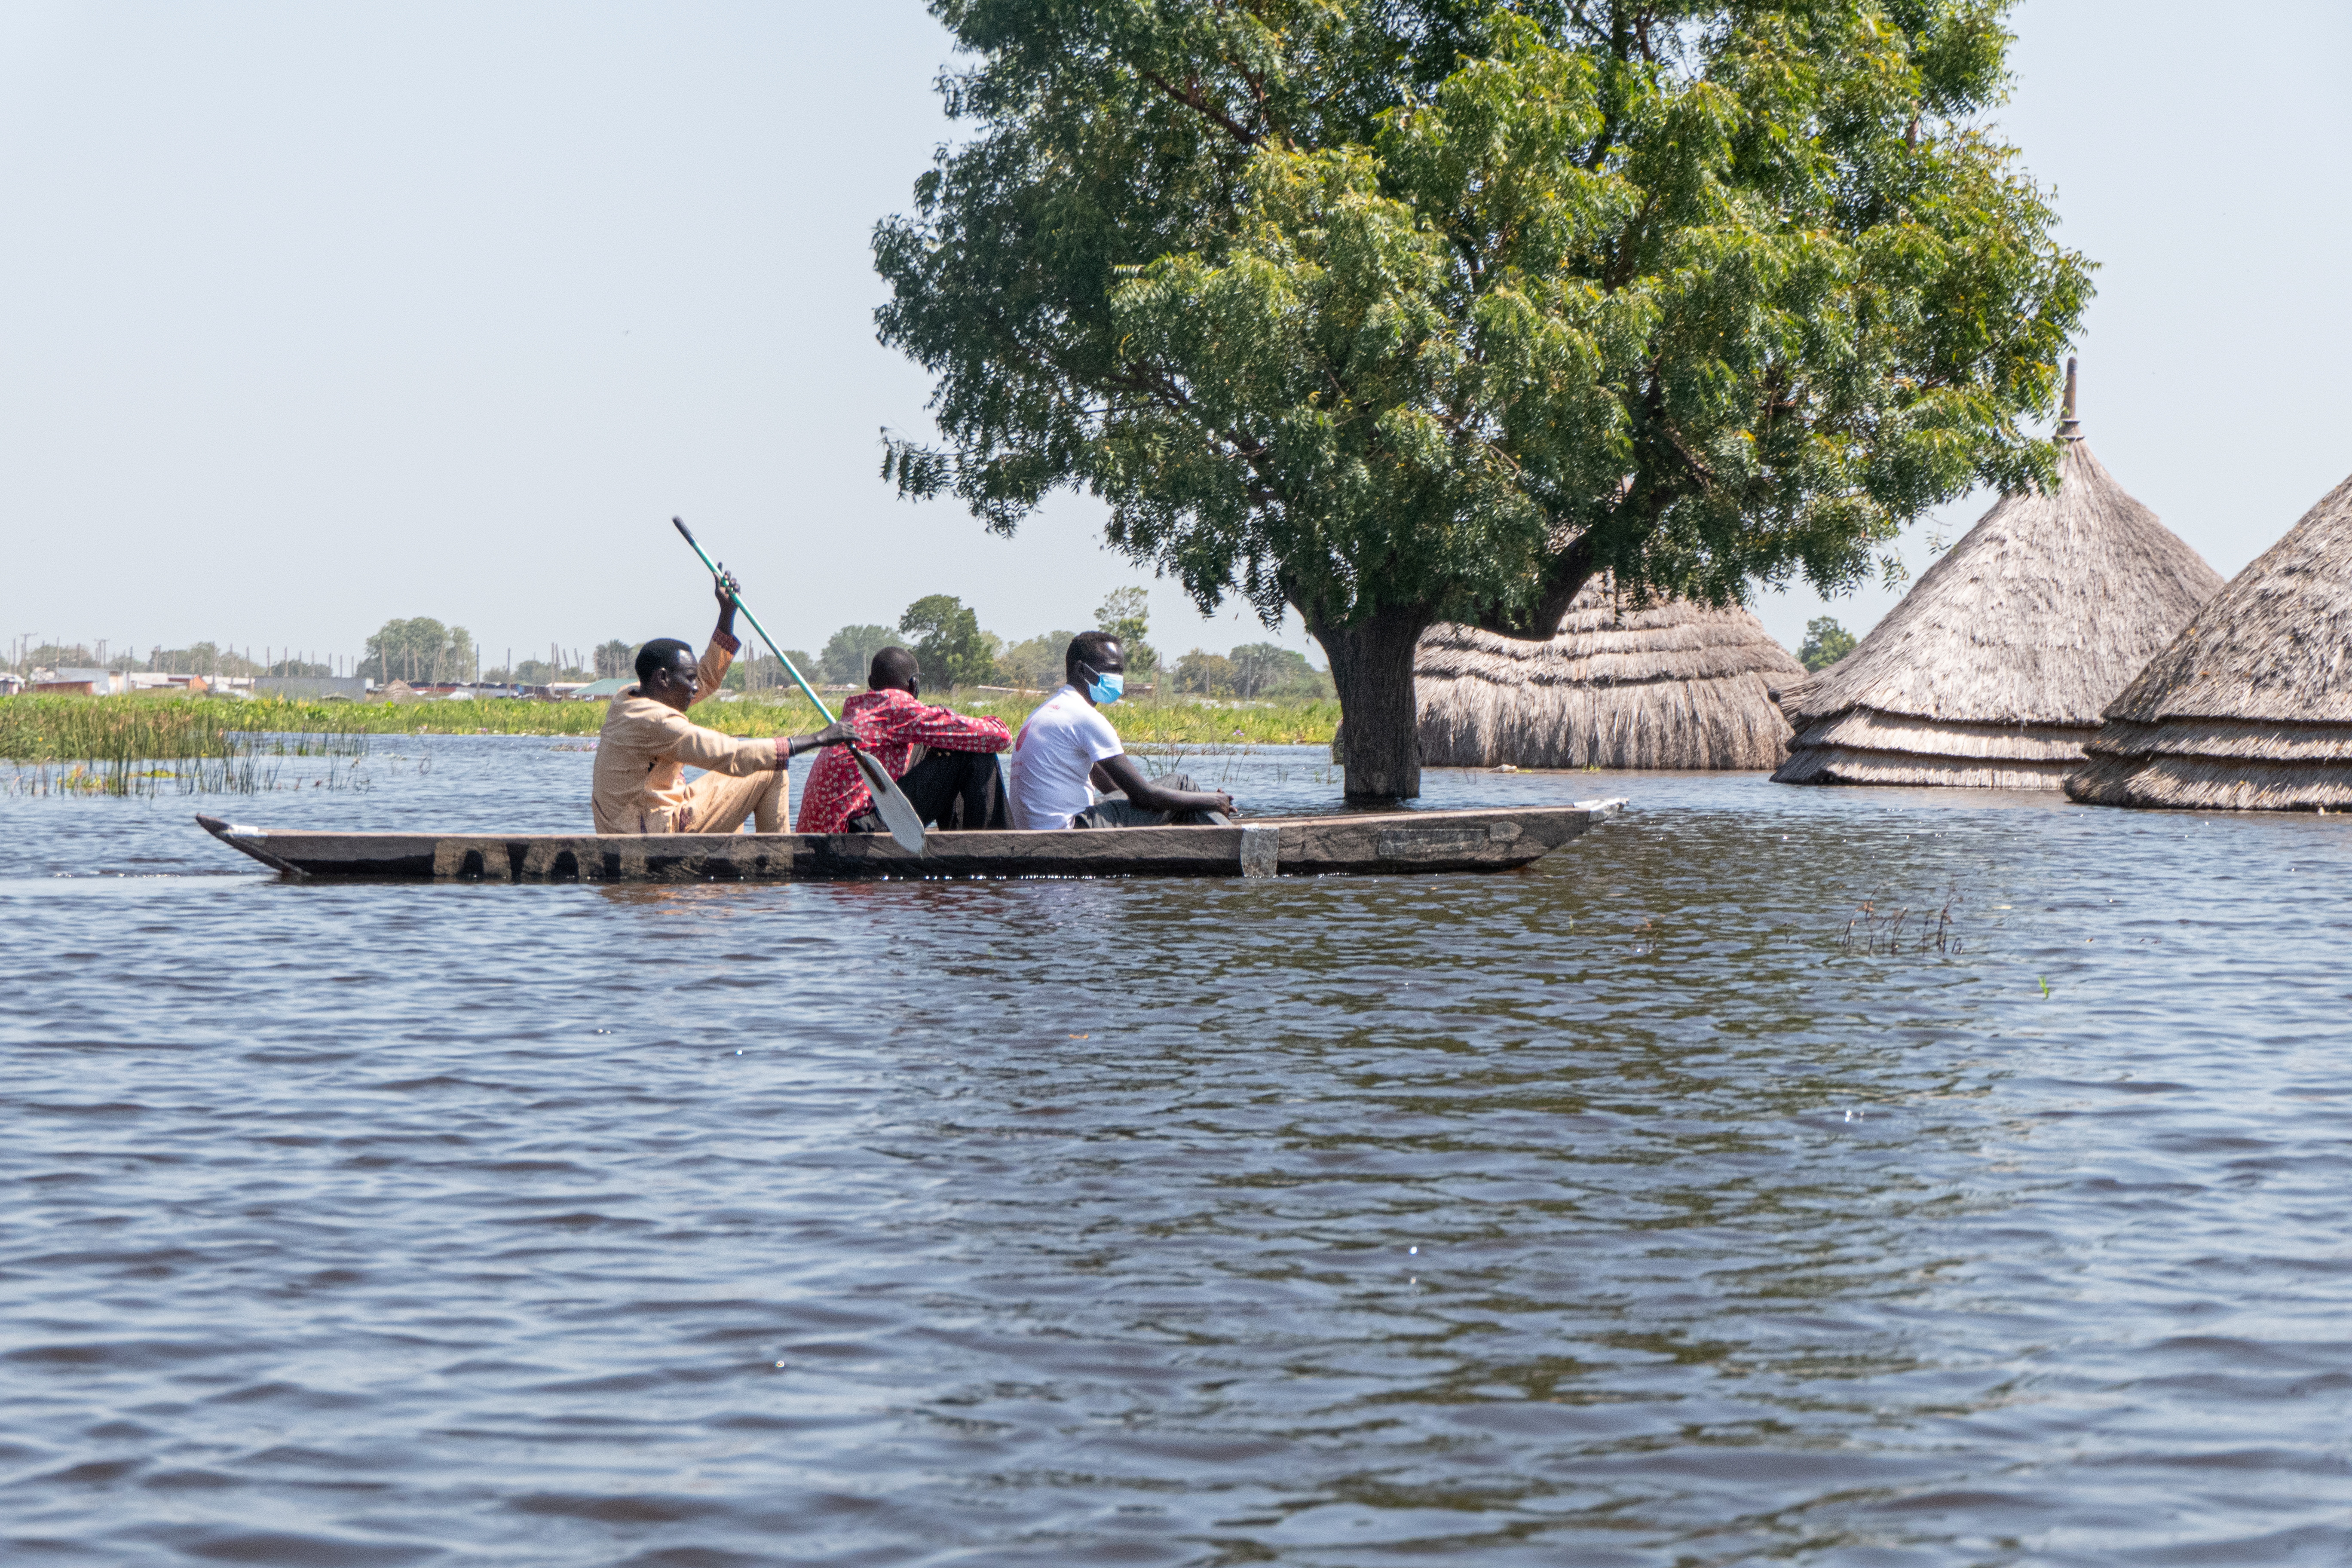 South Sudanese men navigate a canoe through flood waters in Bentiu in Unity State